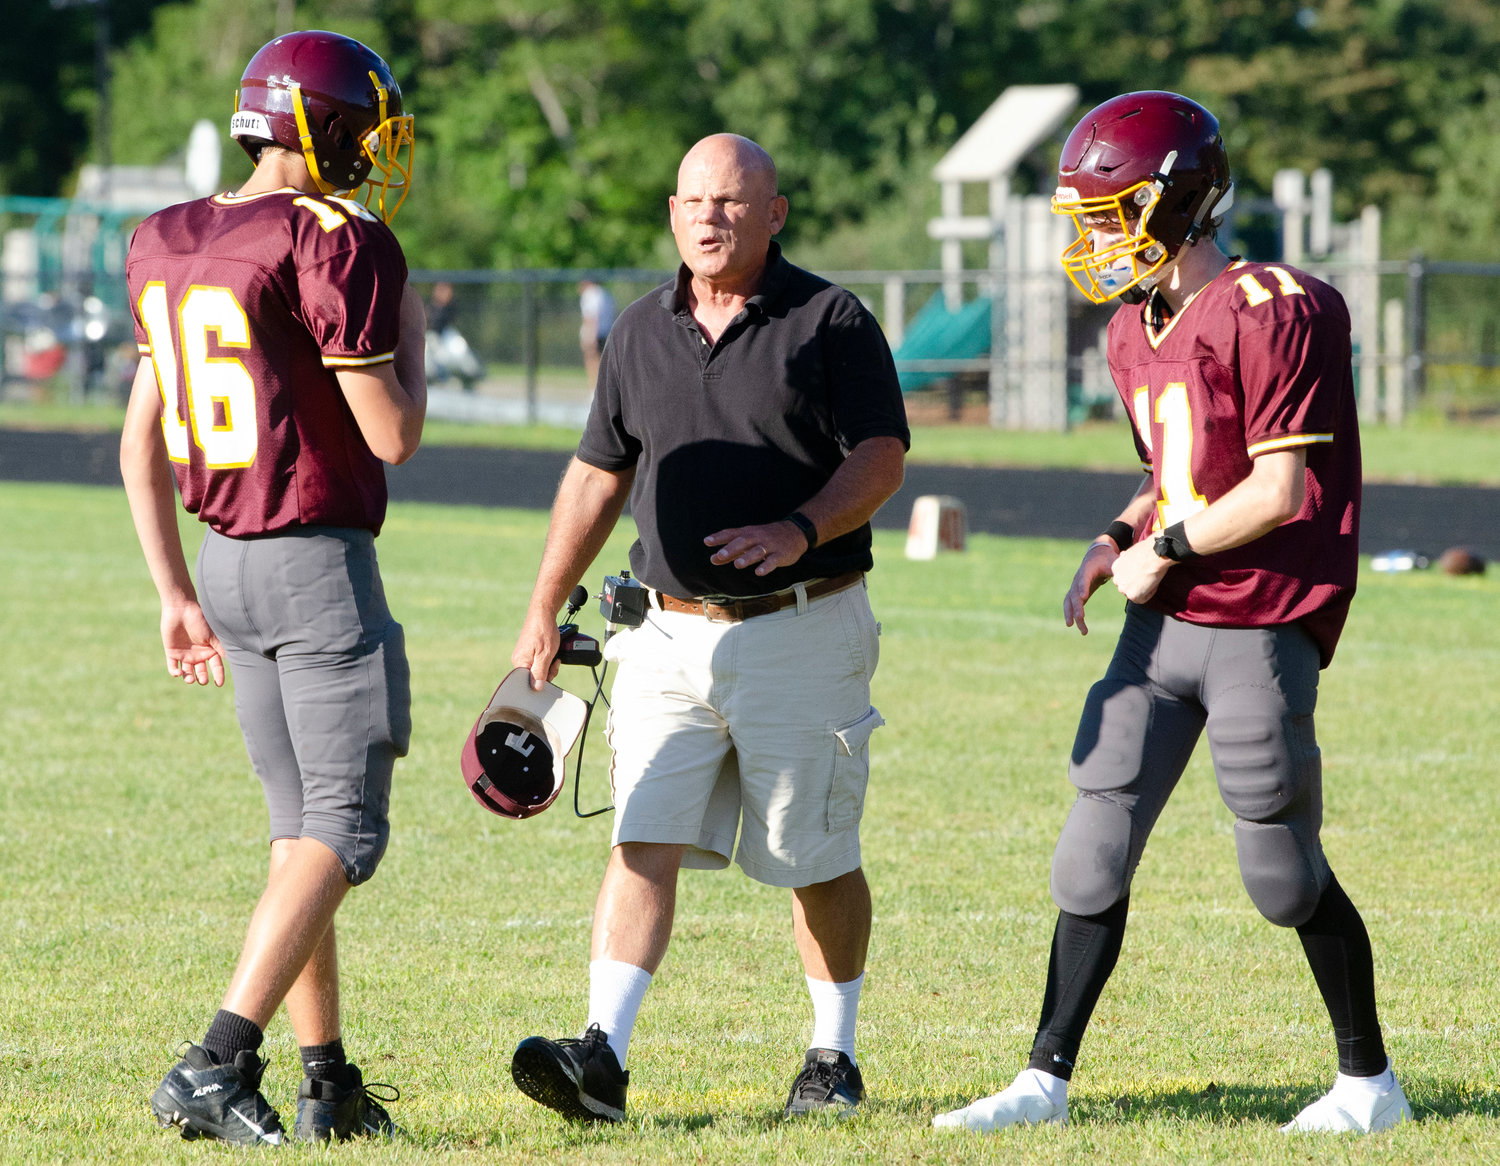 Tigers head coach Bob Murray speaks to quarterback Ben Sowa (left) and wide receiver Reilly Nicholas during a time out in the second quarter.